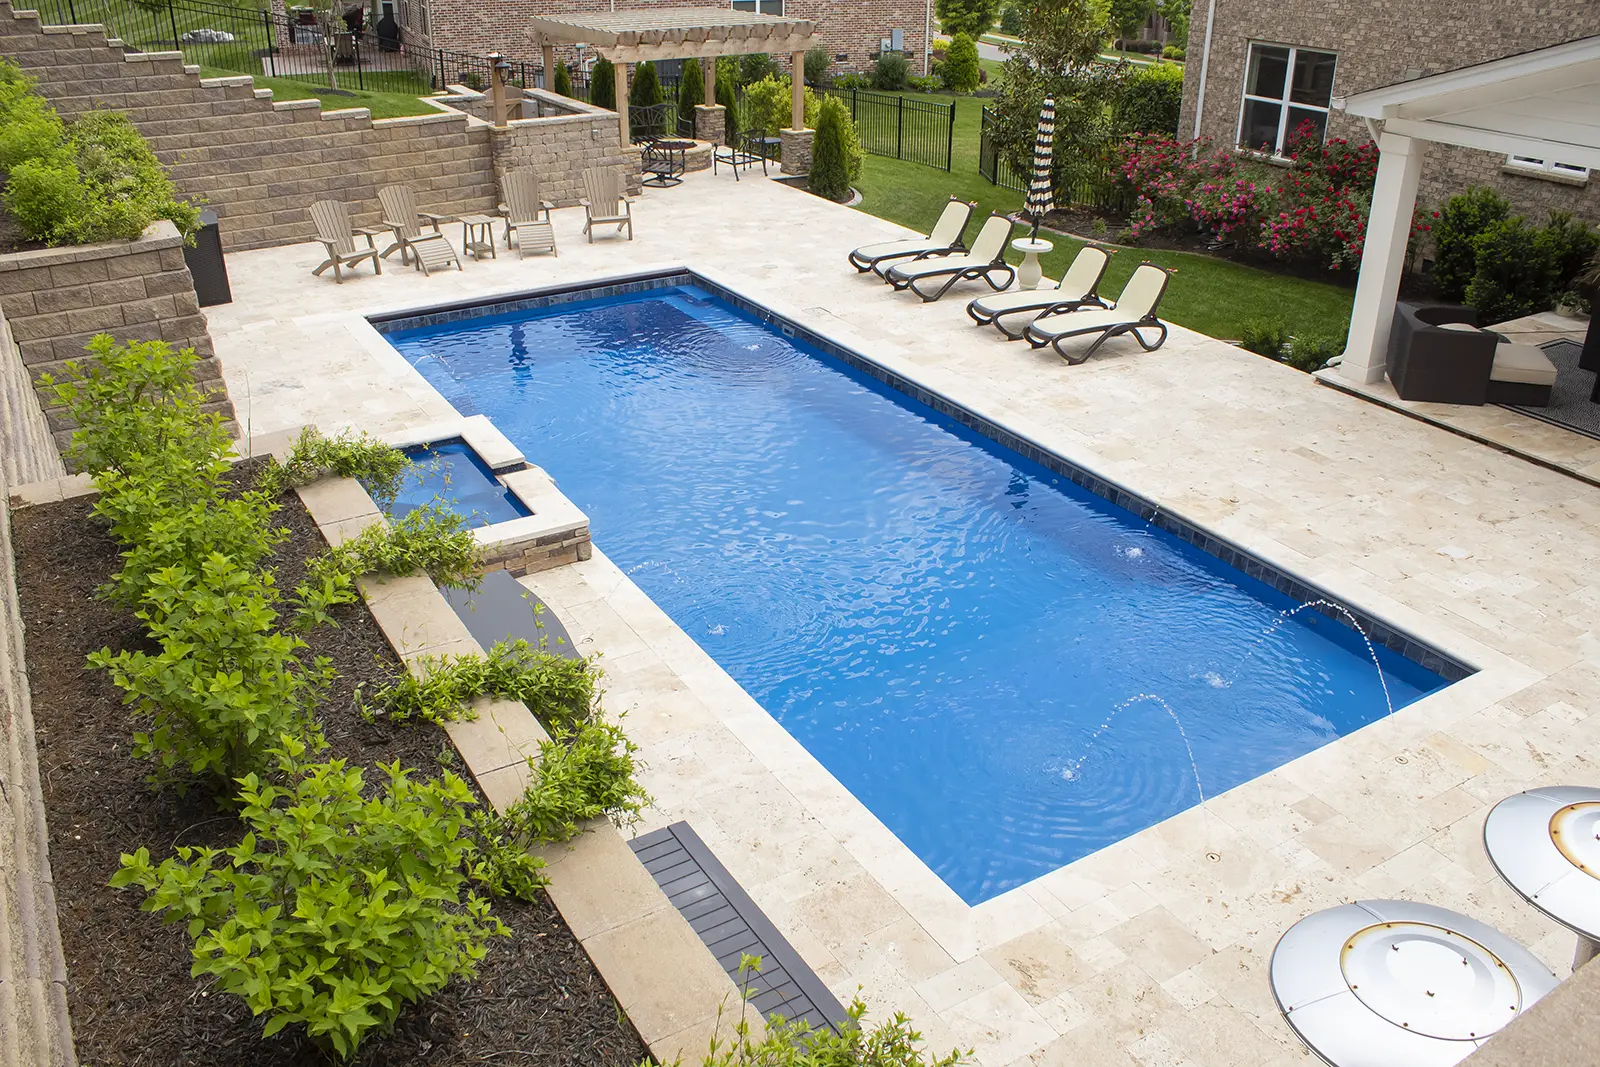 The Leisure Pools Pinnacle™ - let us install your pool in Missouri